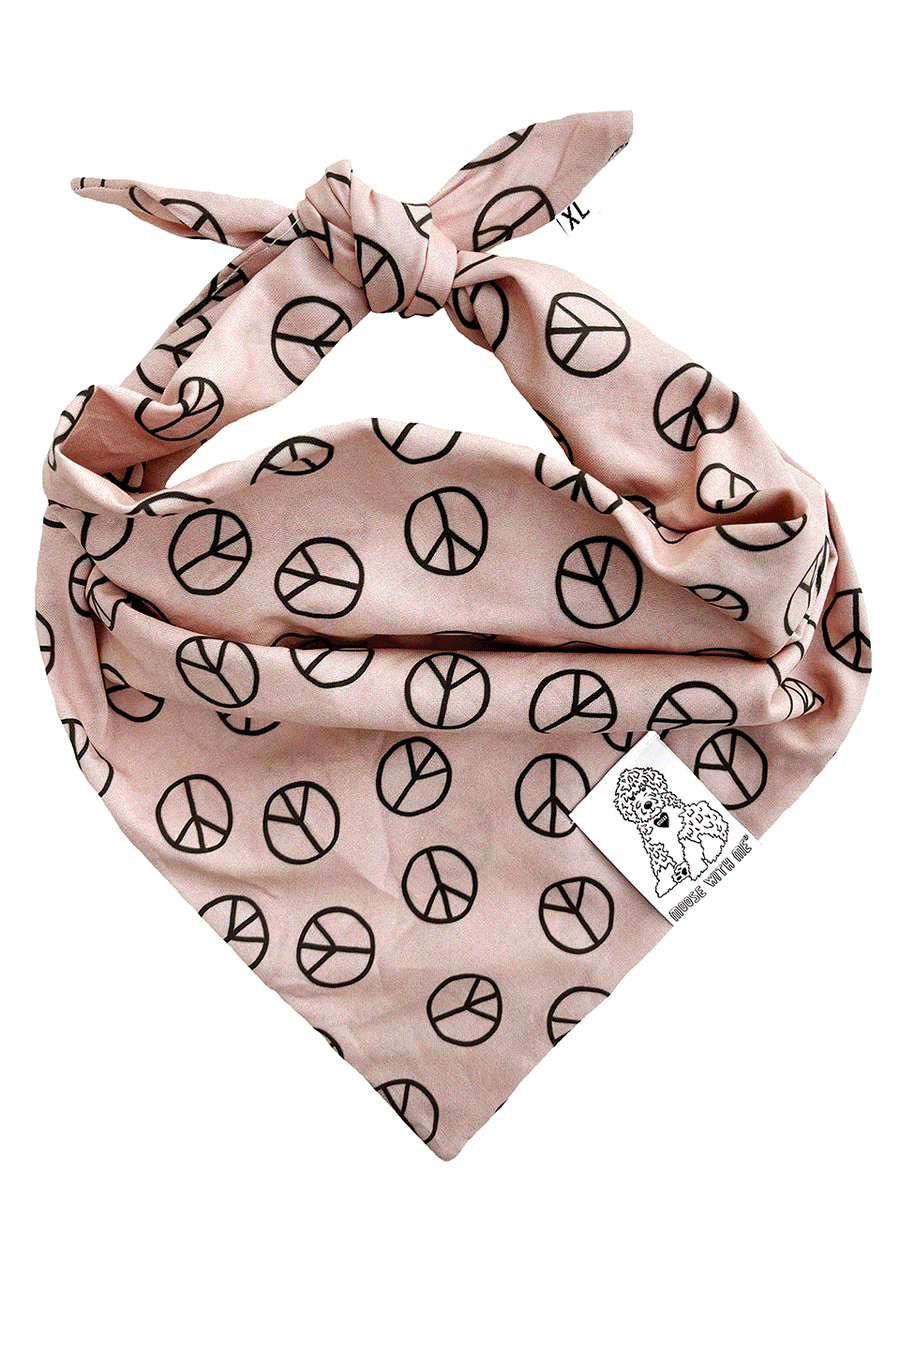 Dog Bandana Peace Sign - Customize with Interchangeable Velcro Patches